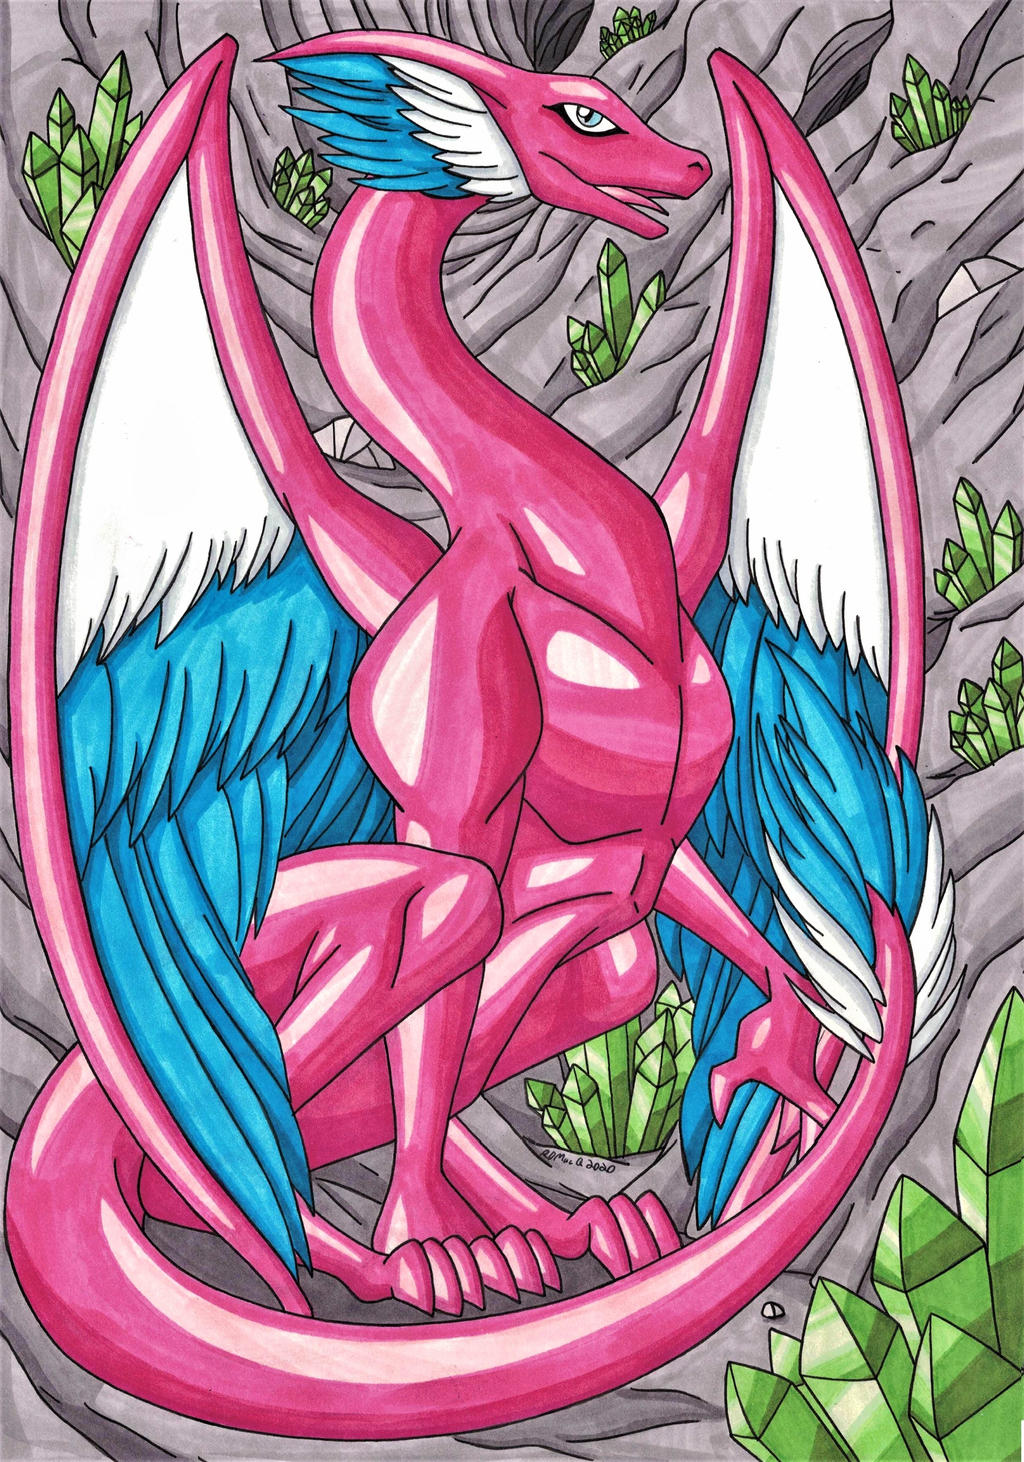 Pink and Black Floral Paper Crane Dragon by HowManyDragons on DeviantArt